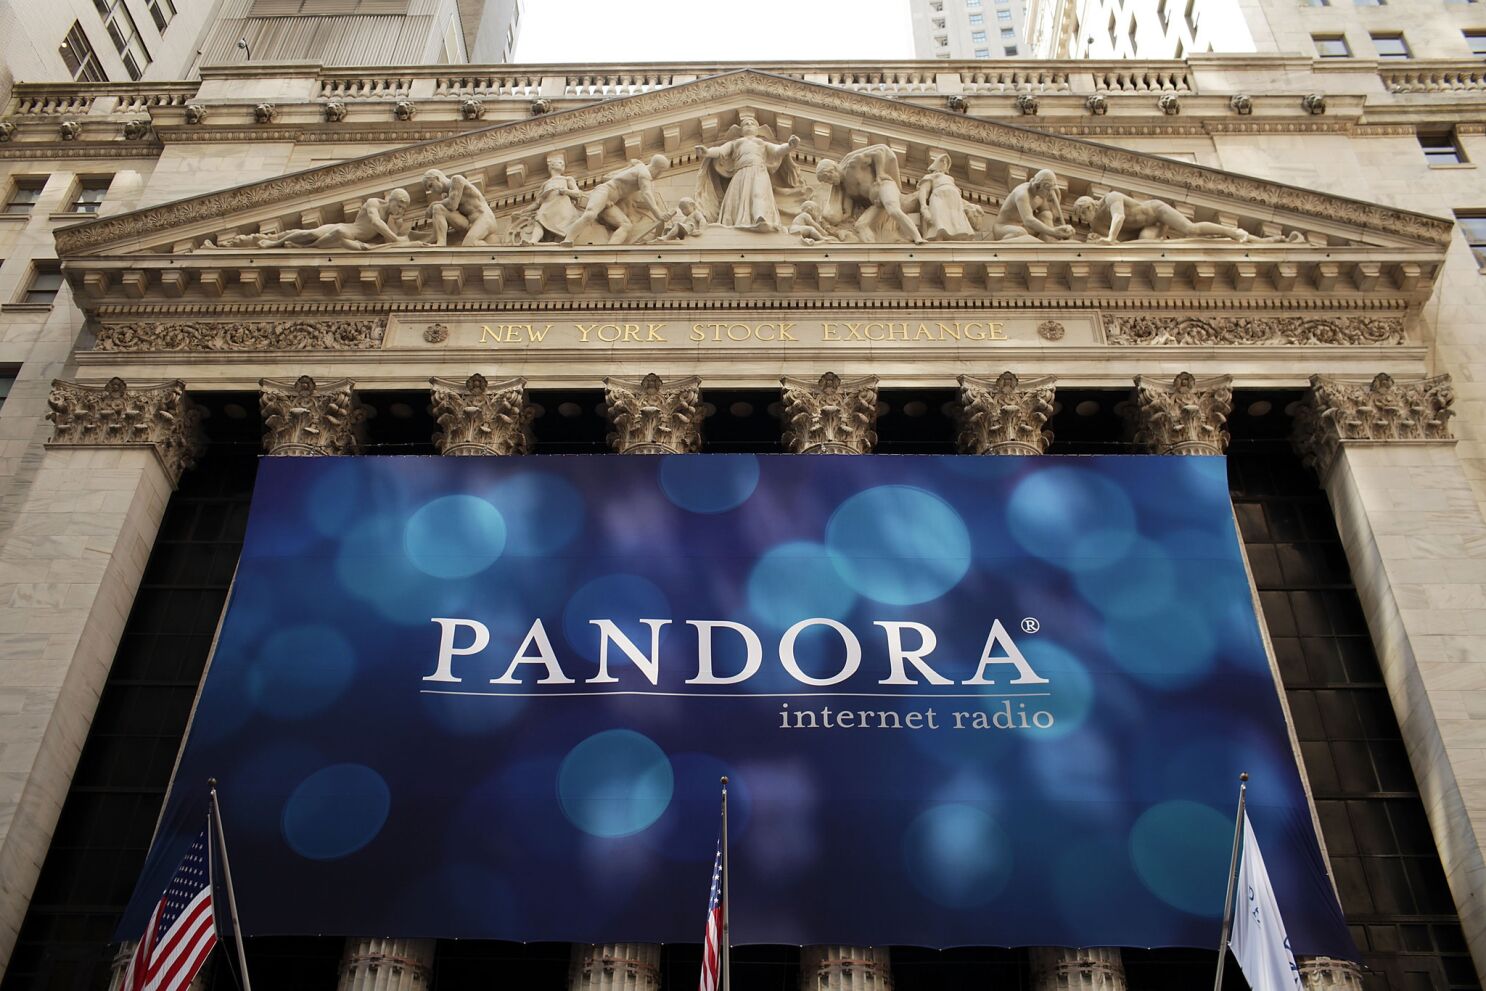 Pandora royalty rate fight to publisher group BMI - Los Angeles